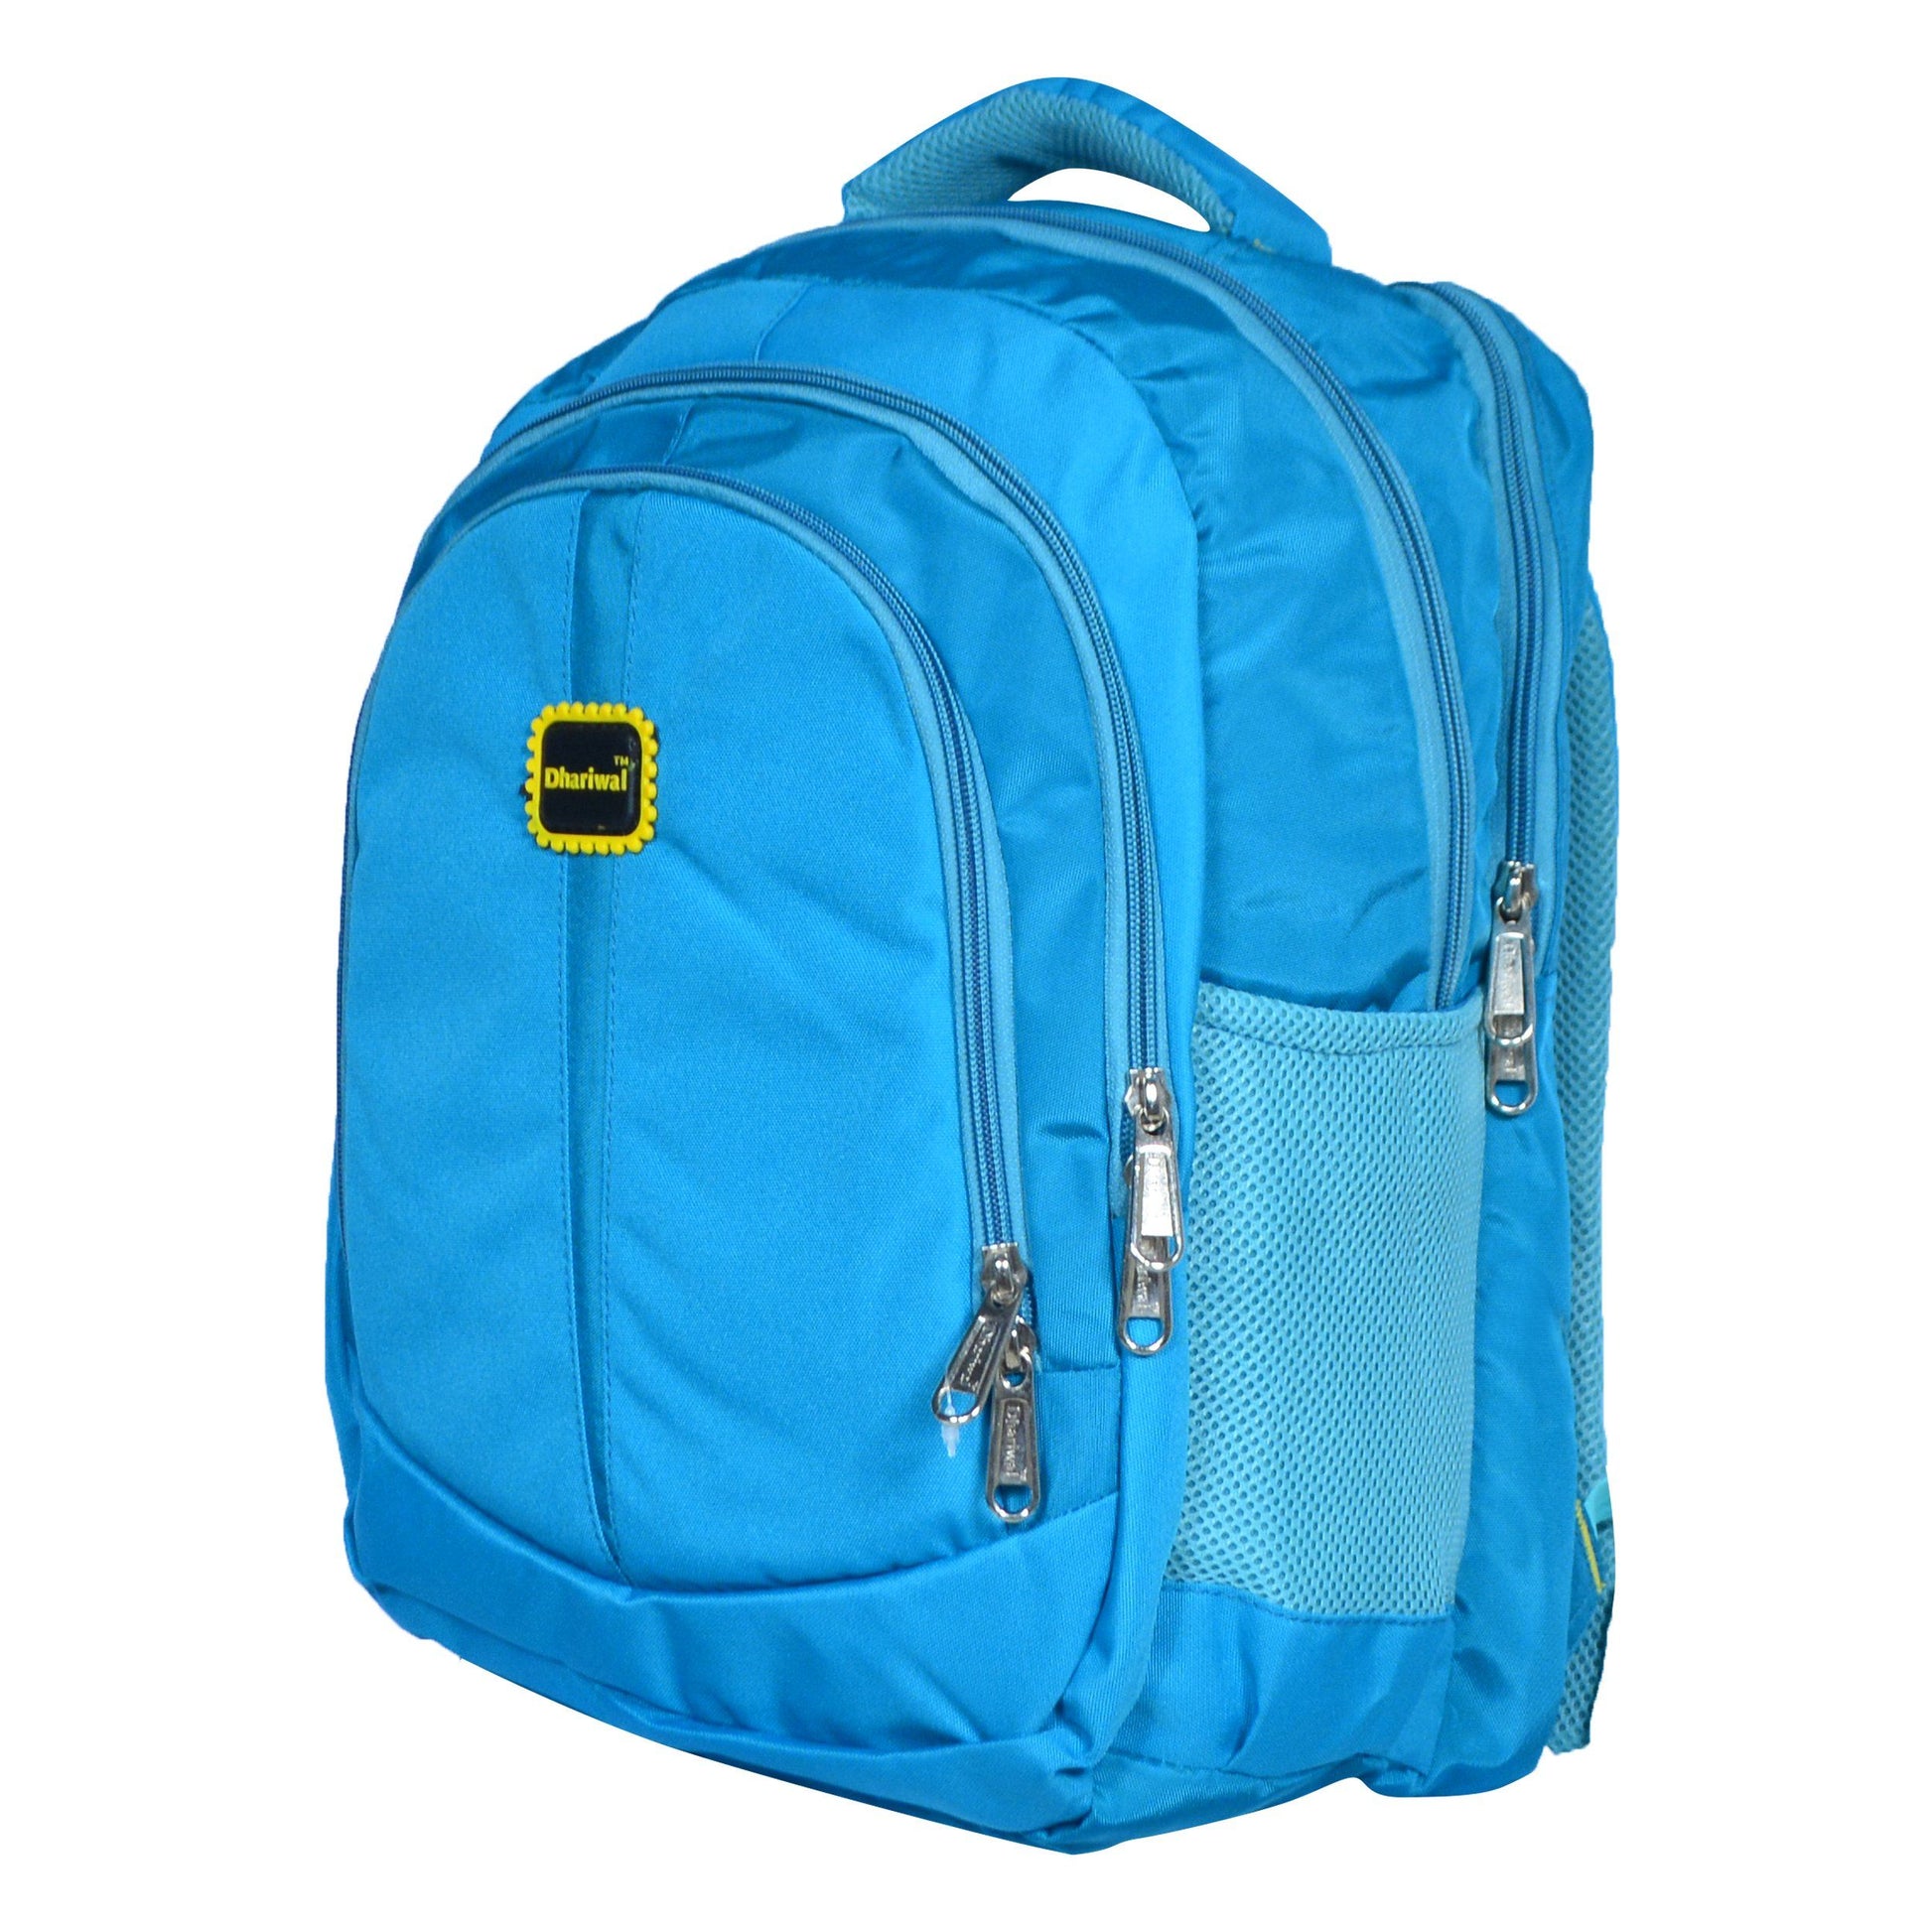 Dhariwal Ultra Light Weight Kids Unisex Dual Compartment School Backpack 25L SCB-315 School Bags Dhariwal 